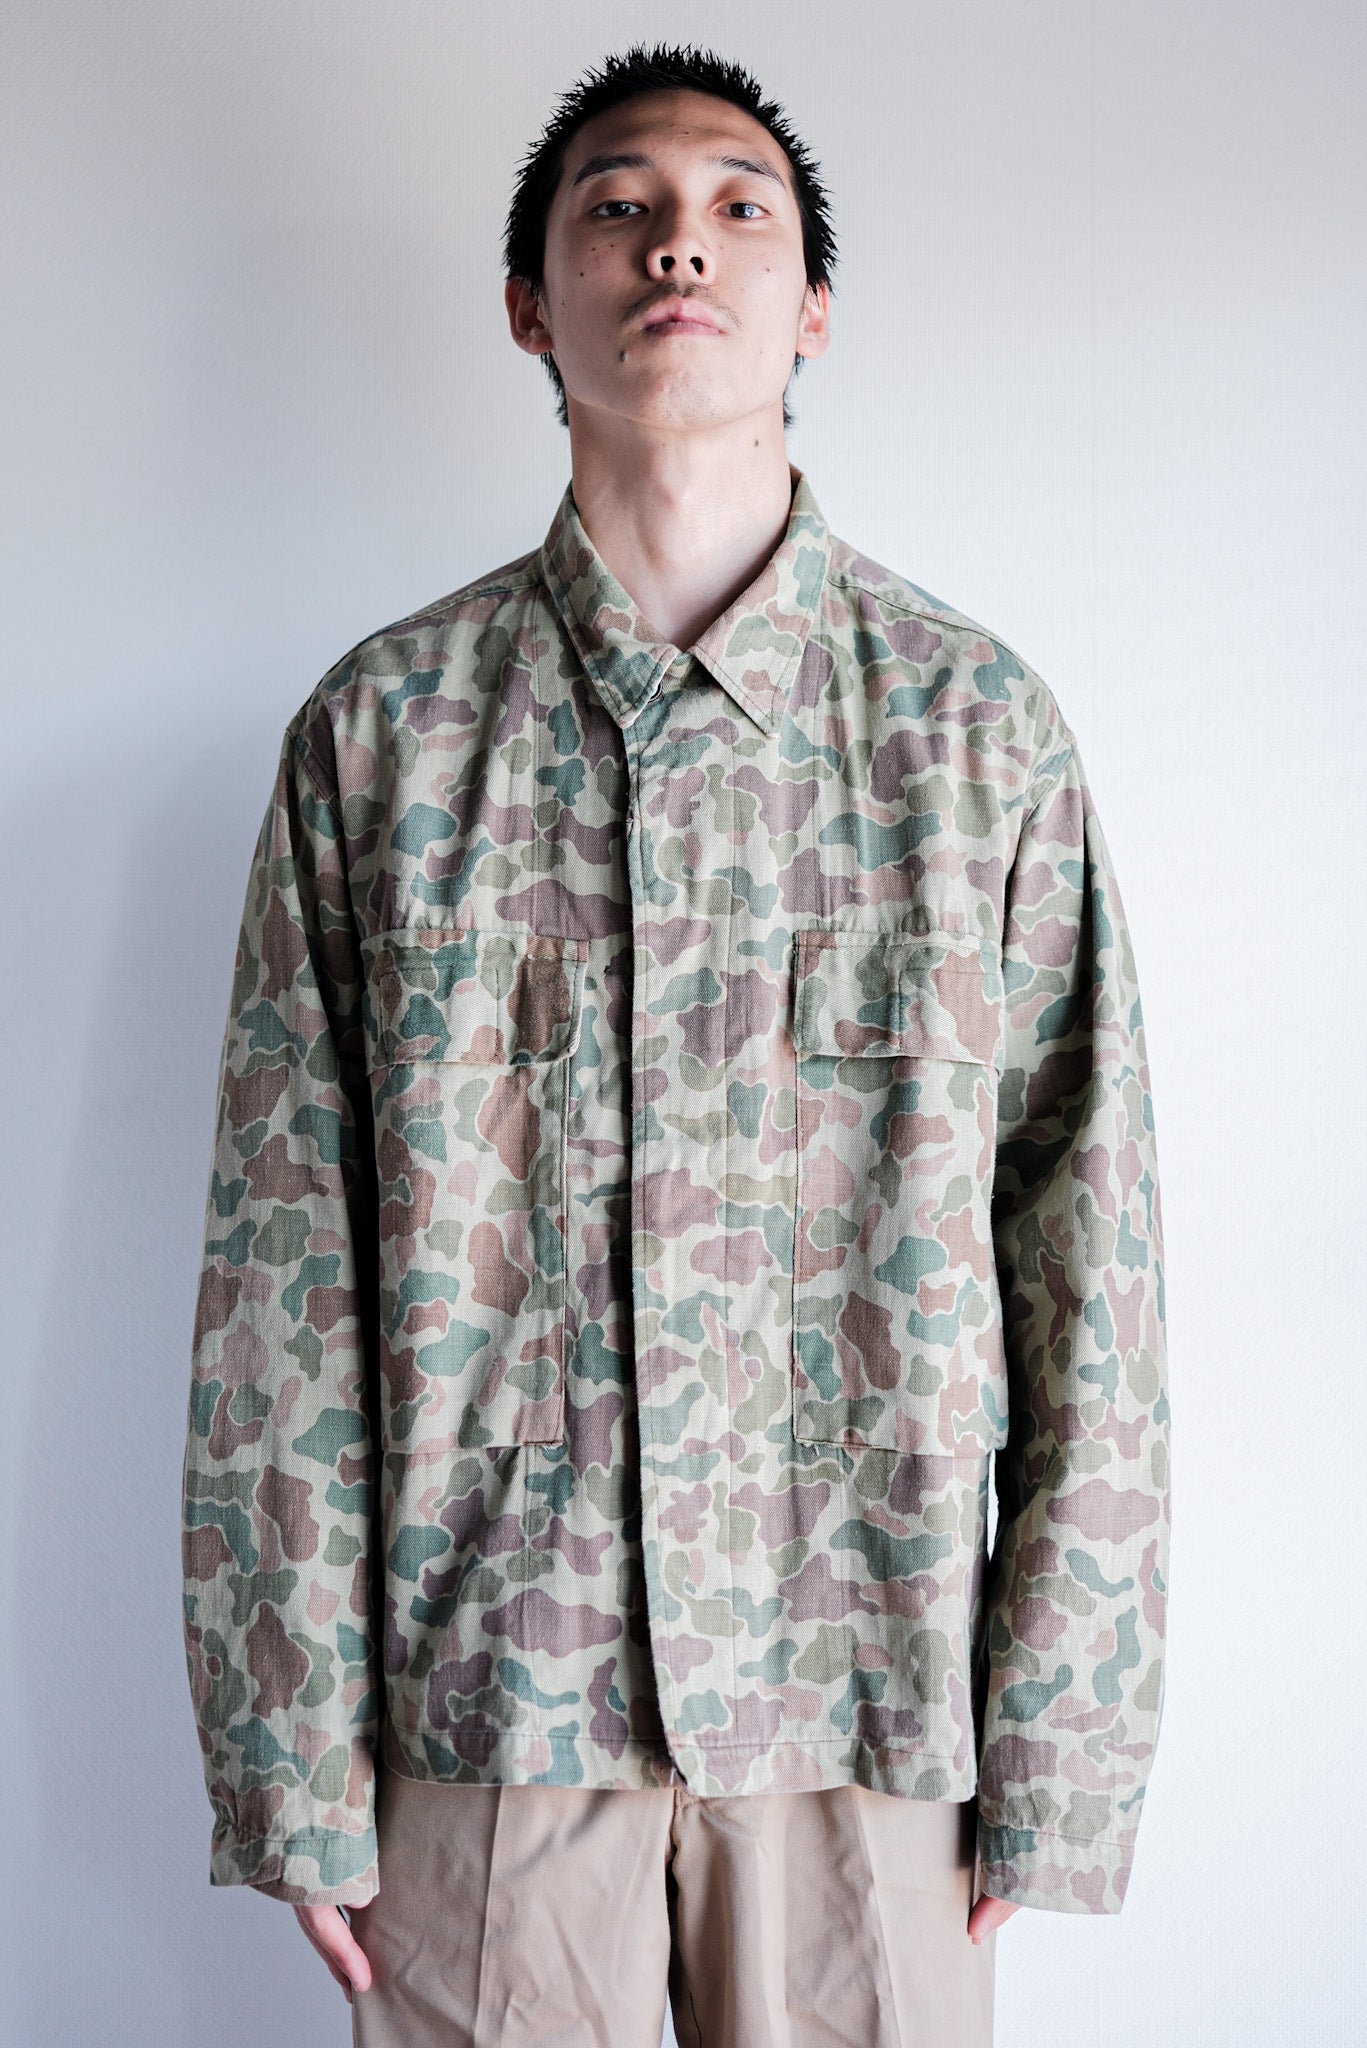 [~ 50's] Néerlandais Army Frogspin Camouflage Camouflage Field Veste Taille.46